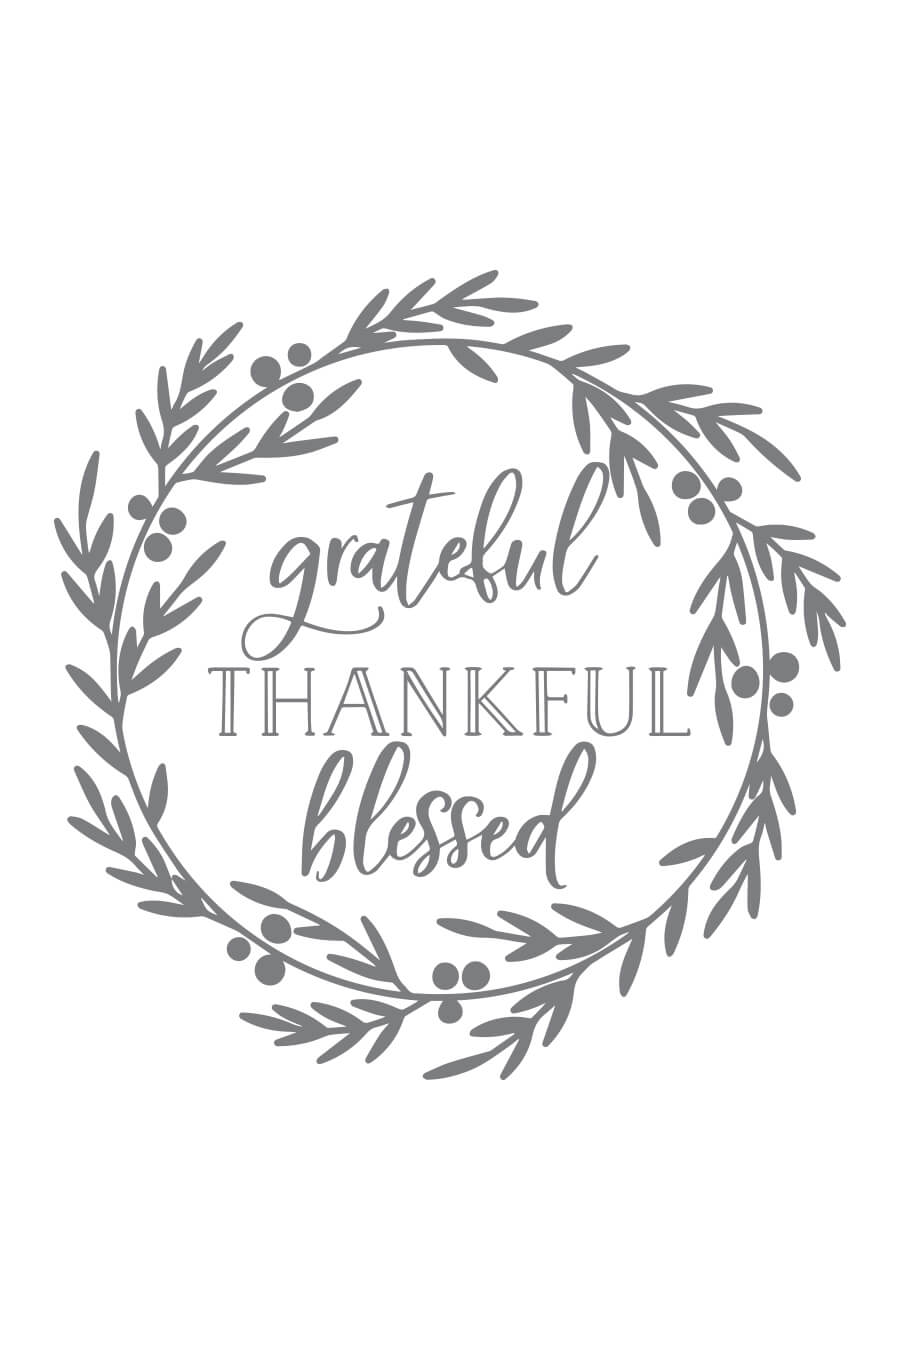 Download Grateful Thankful Blessed Svg File Chicfetti SVG, PNG, EPS, DXF File